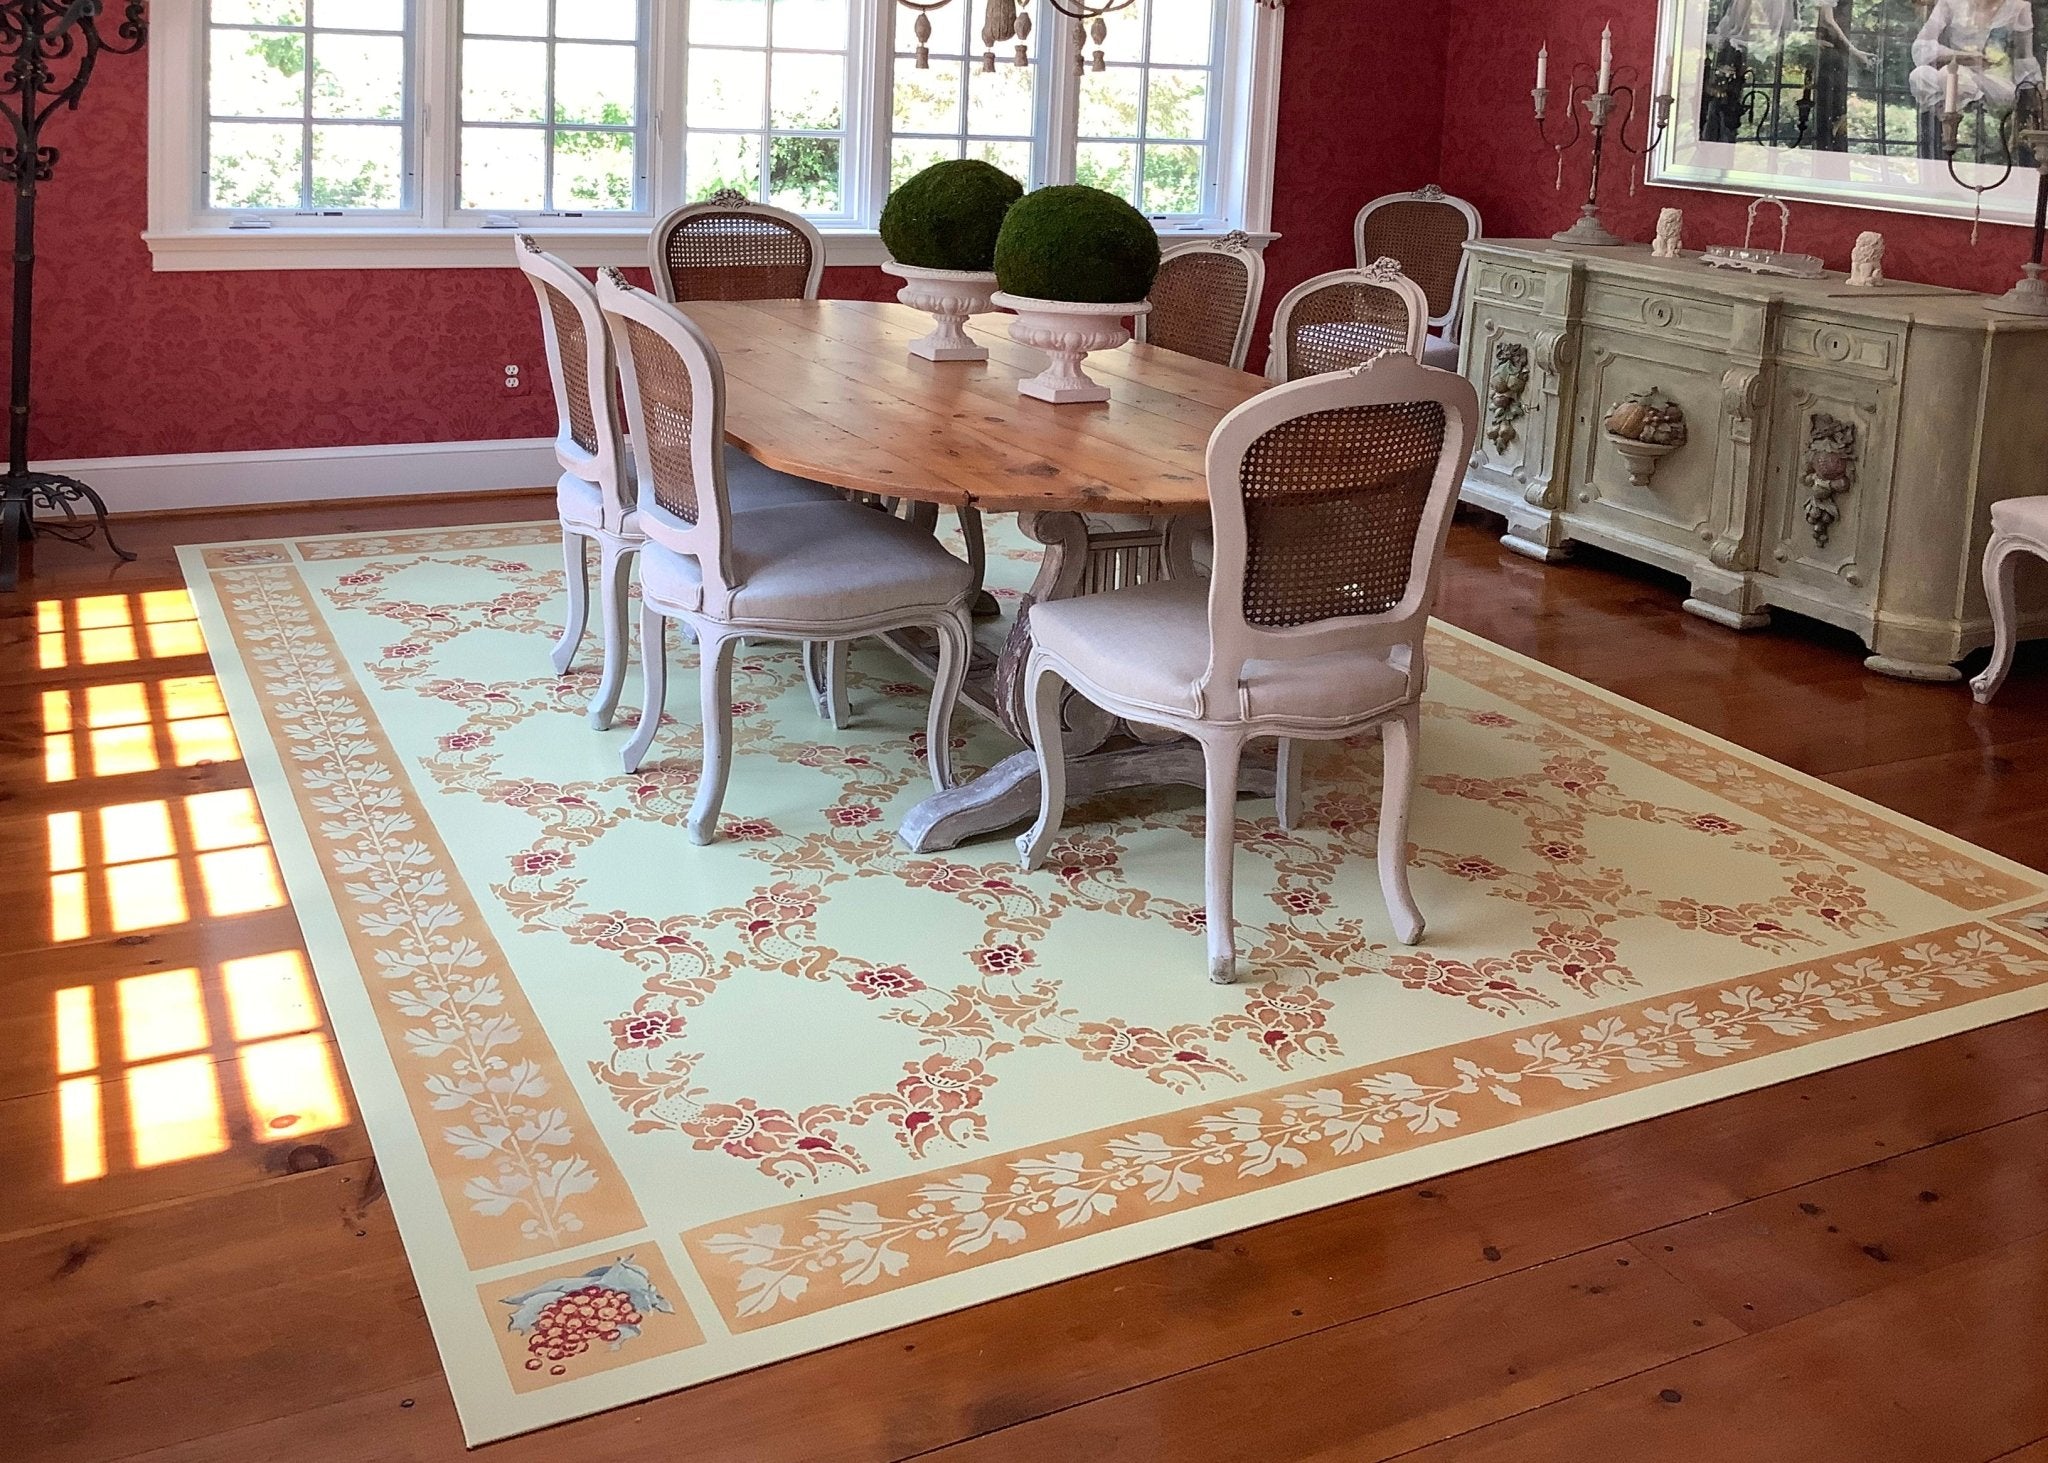 In-situ image of this custom floorcloth with the buffet that was the inspiration for its hand-painted corner motifs.